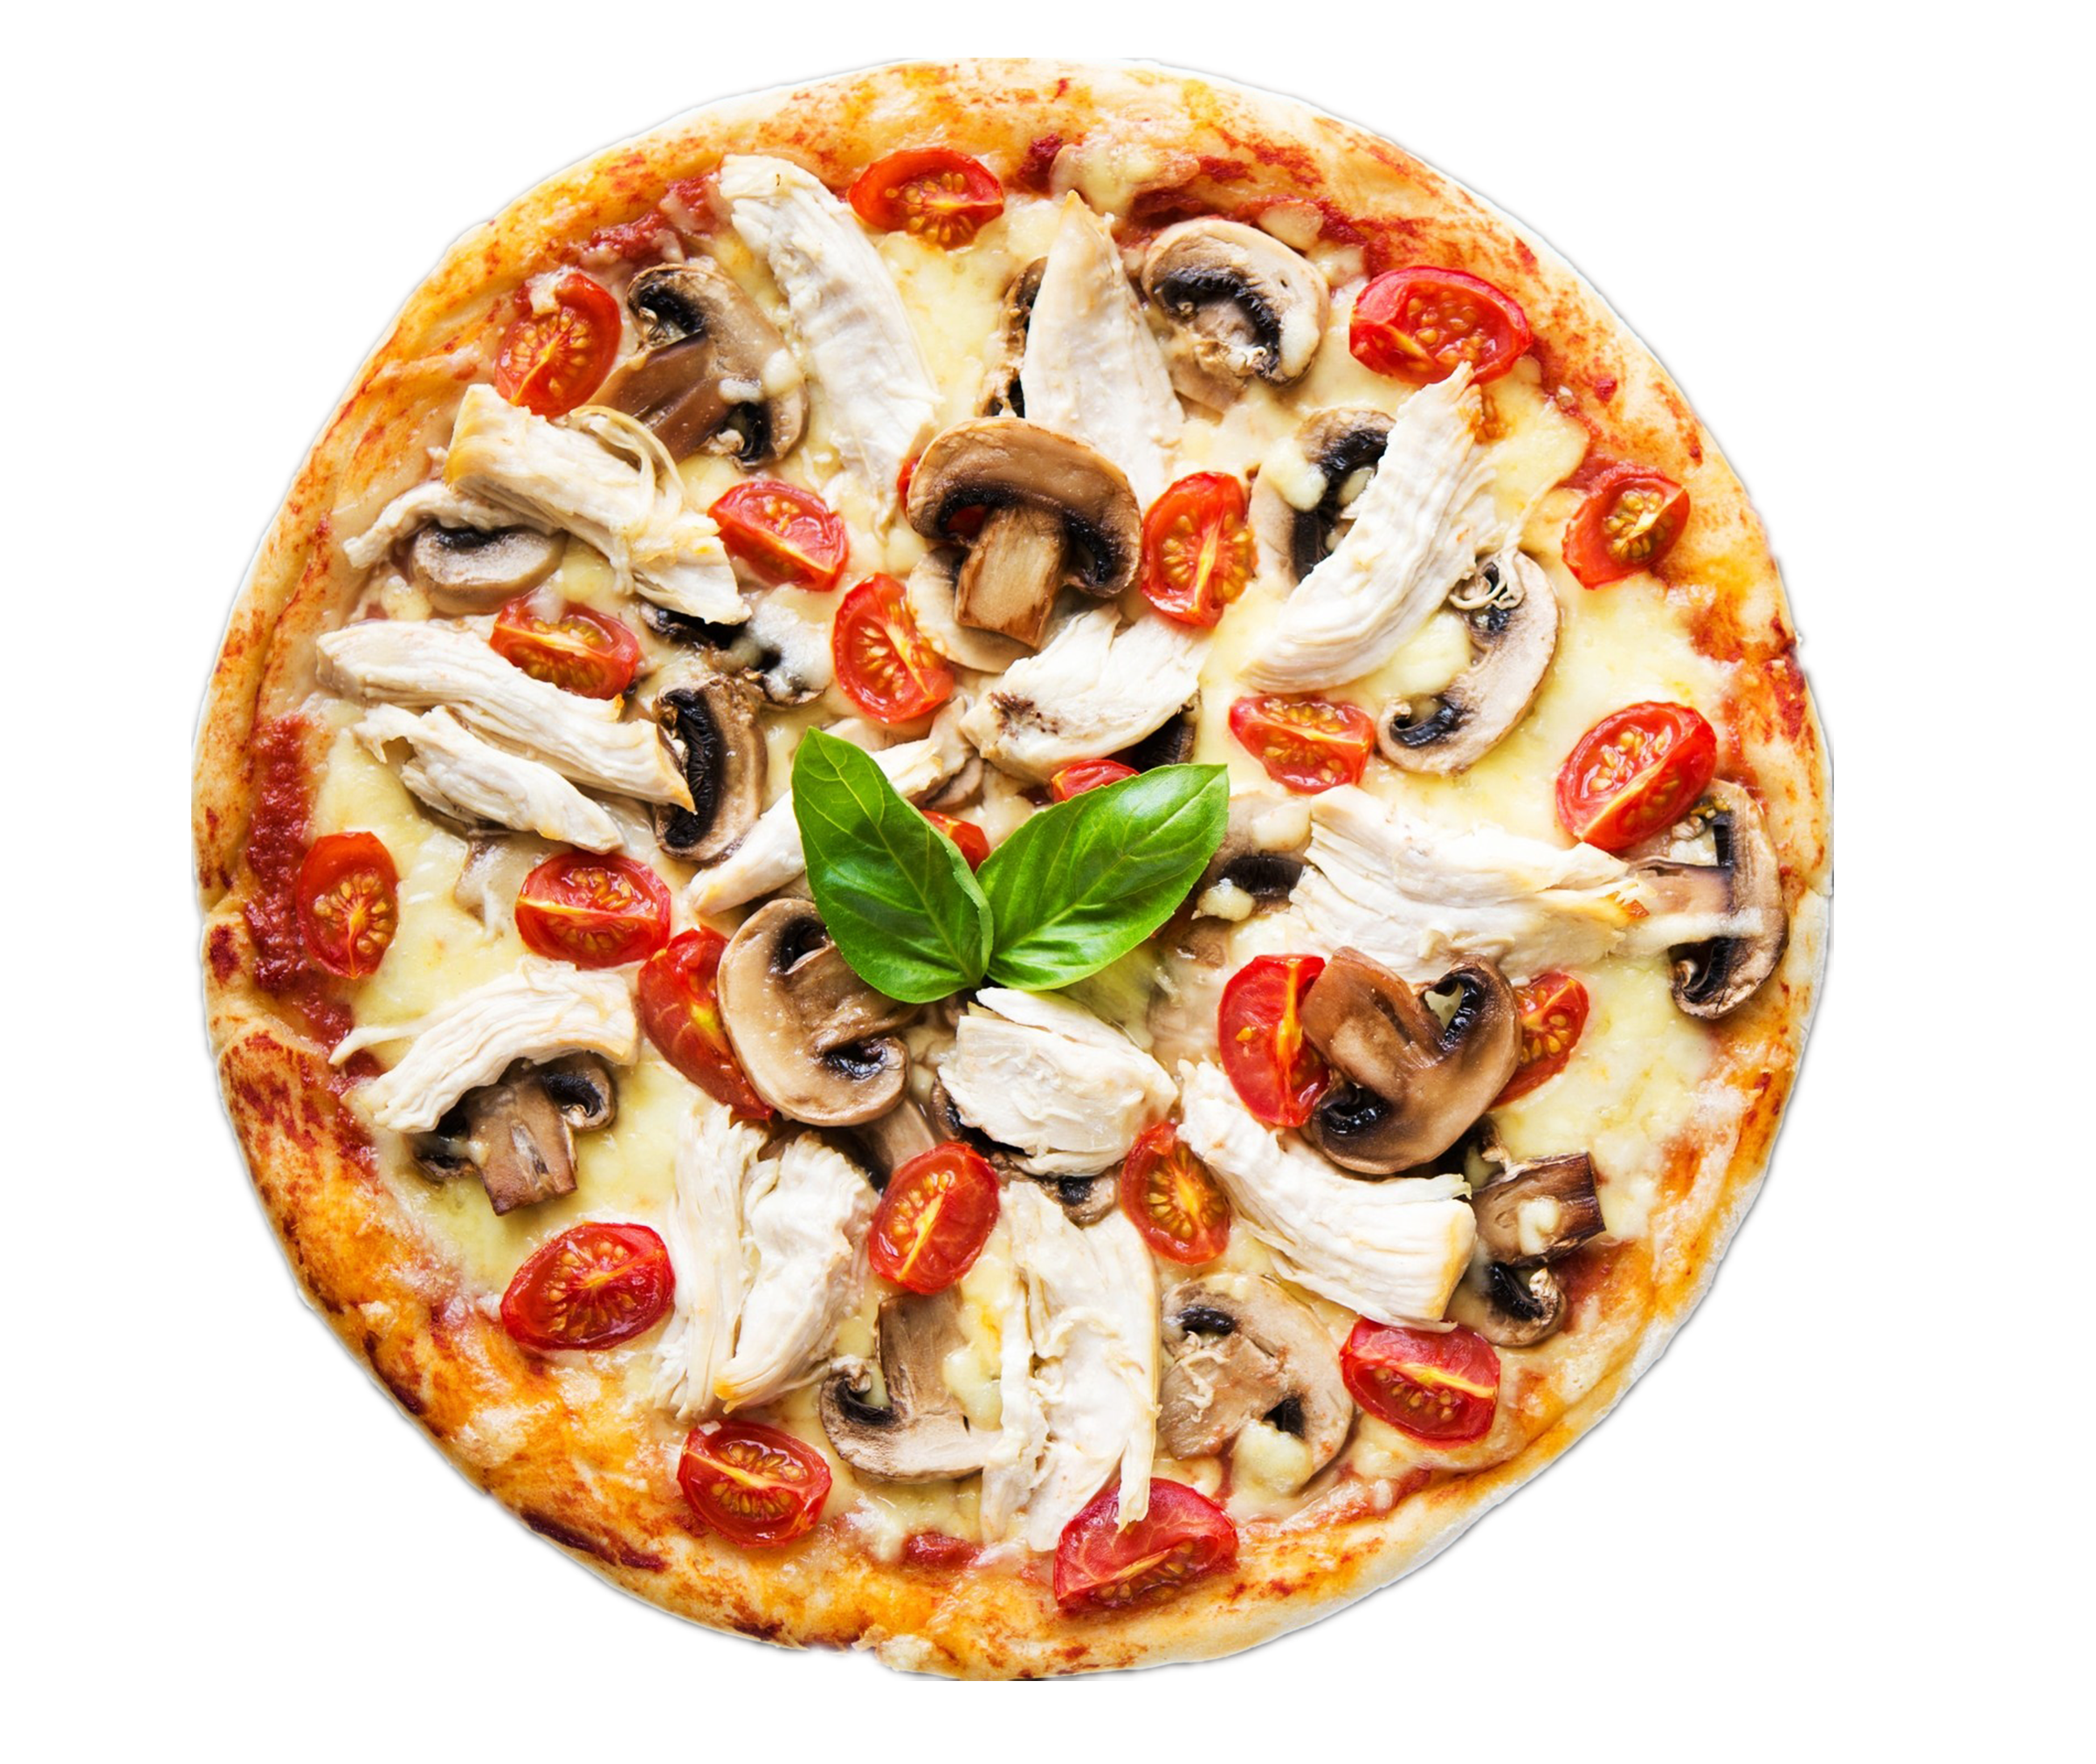 Indulge into deliciously healthy pizzas at Pizzaronee | From the house ...